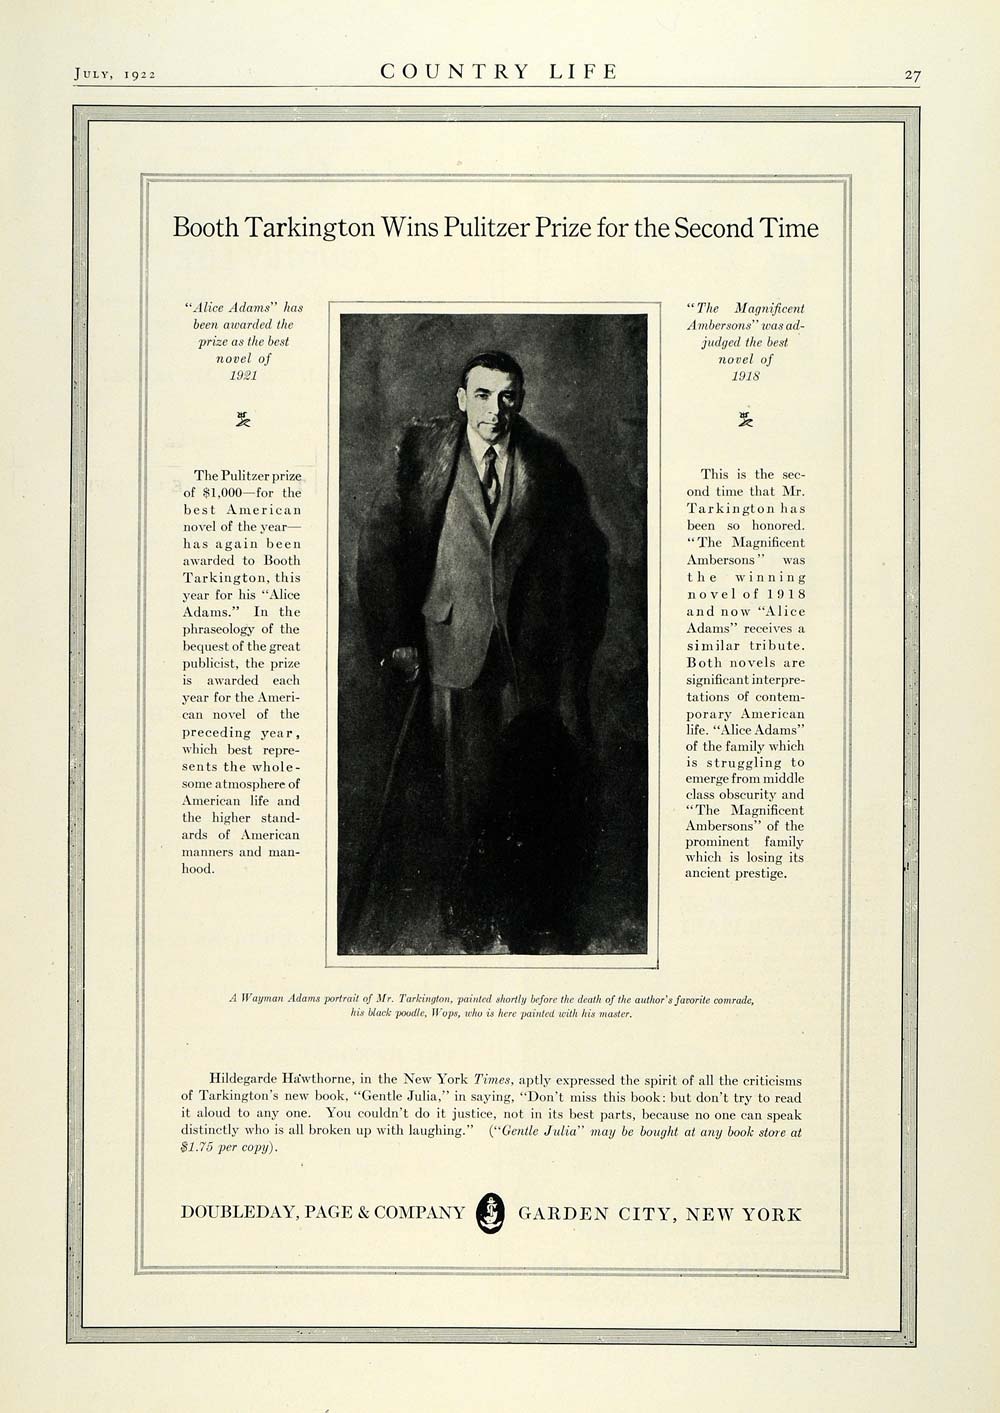 1922 Ad Double Day Page Co Garden City New York Booth Tarkington Pulitzer COL3